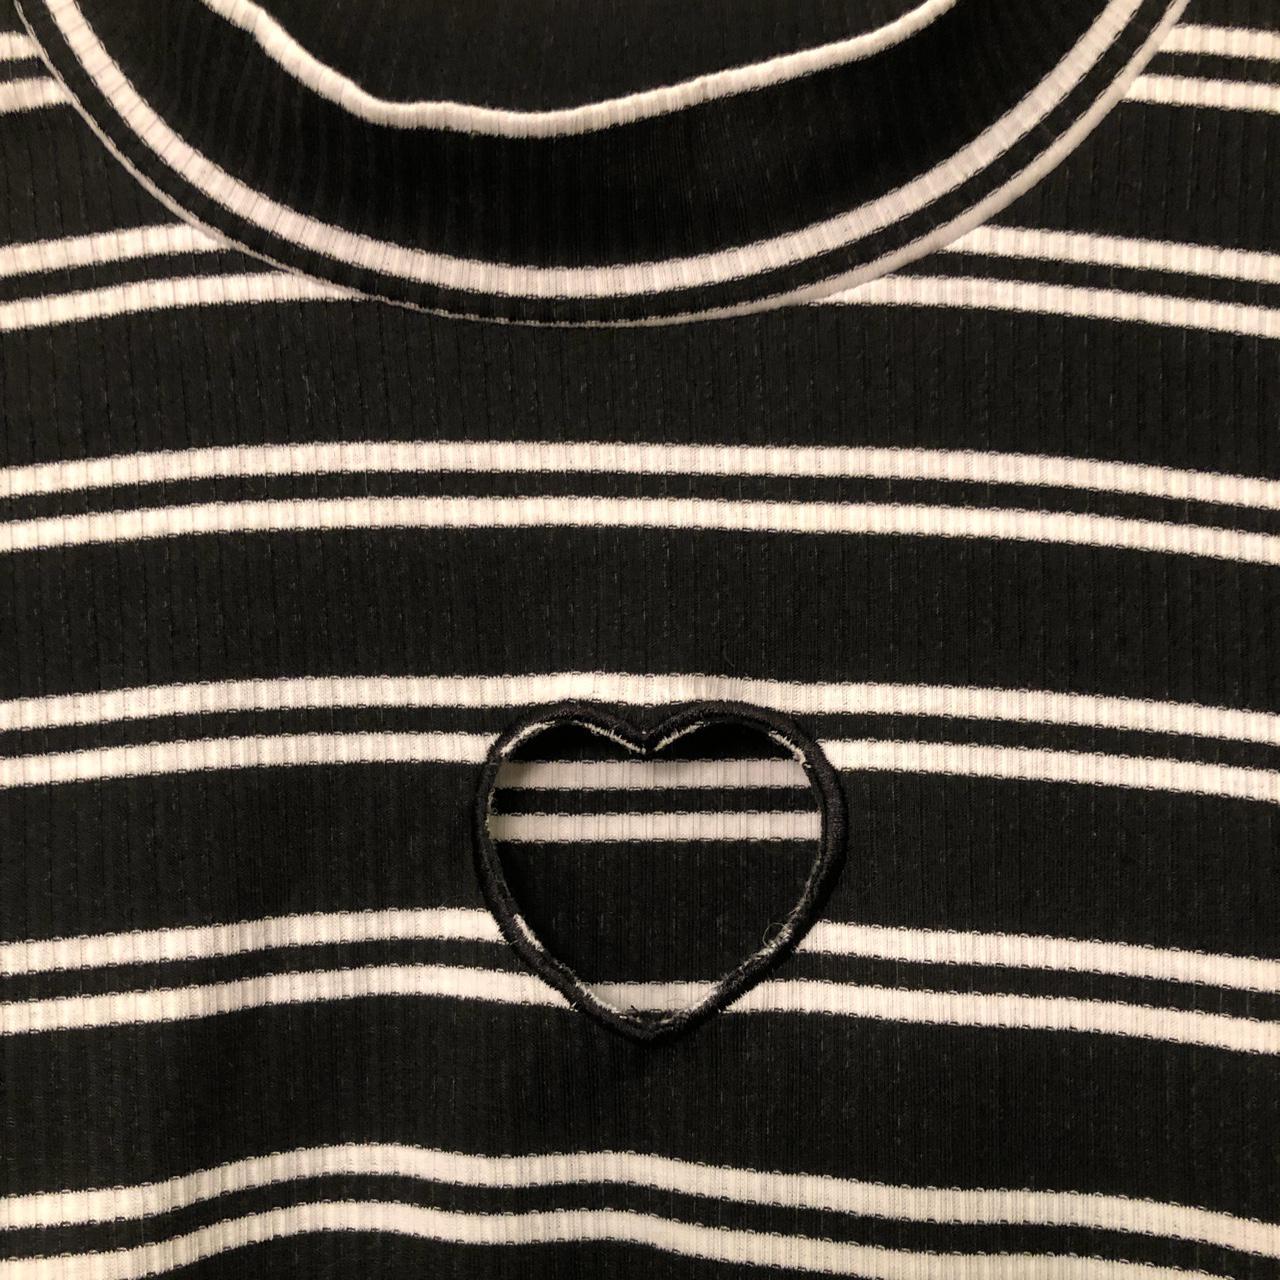 Product Image 2 - Black and White Striped Long